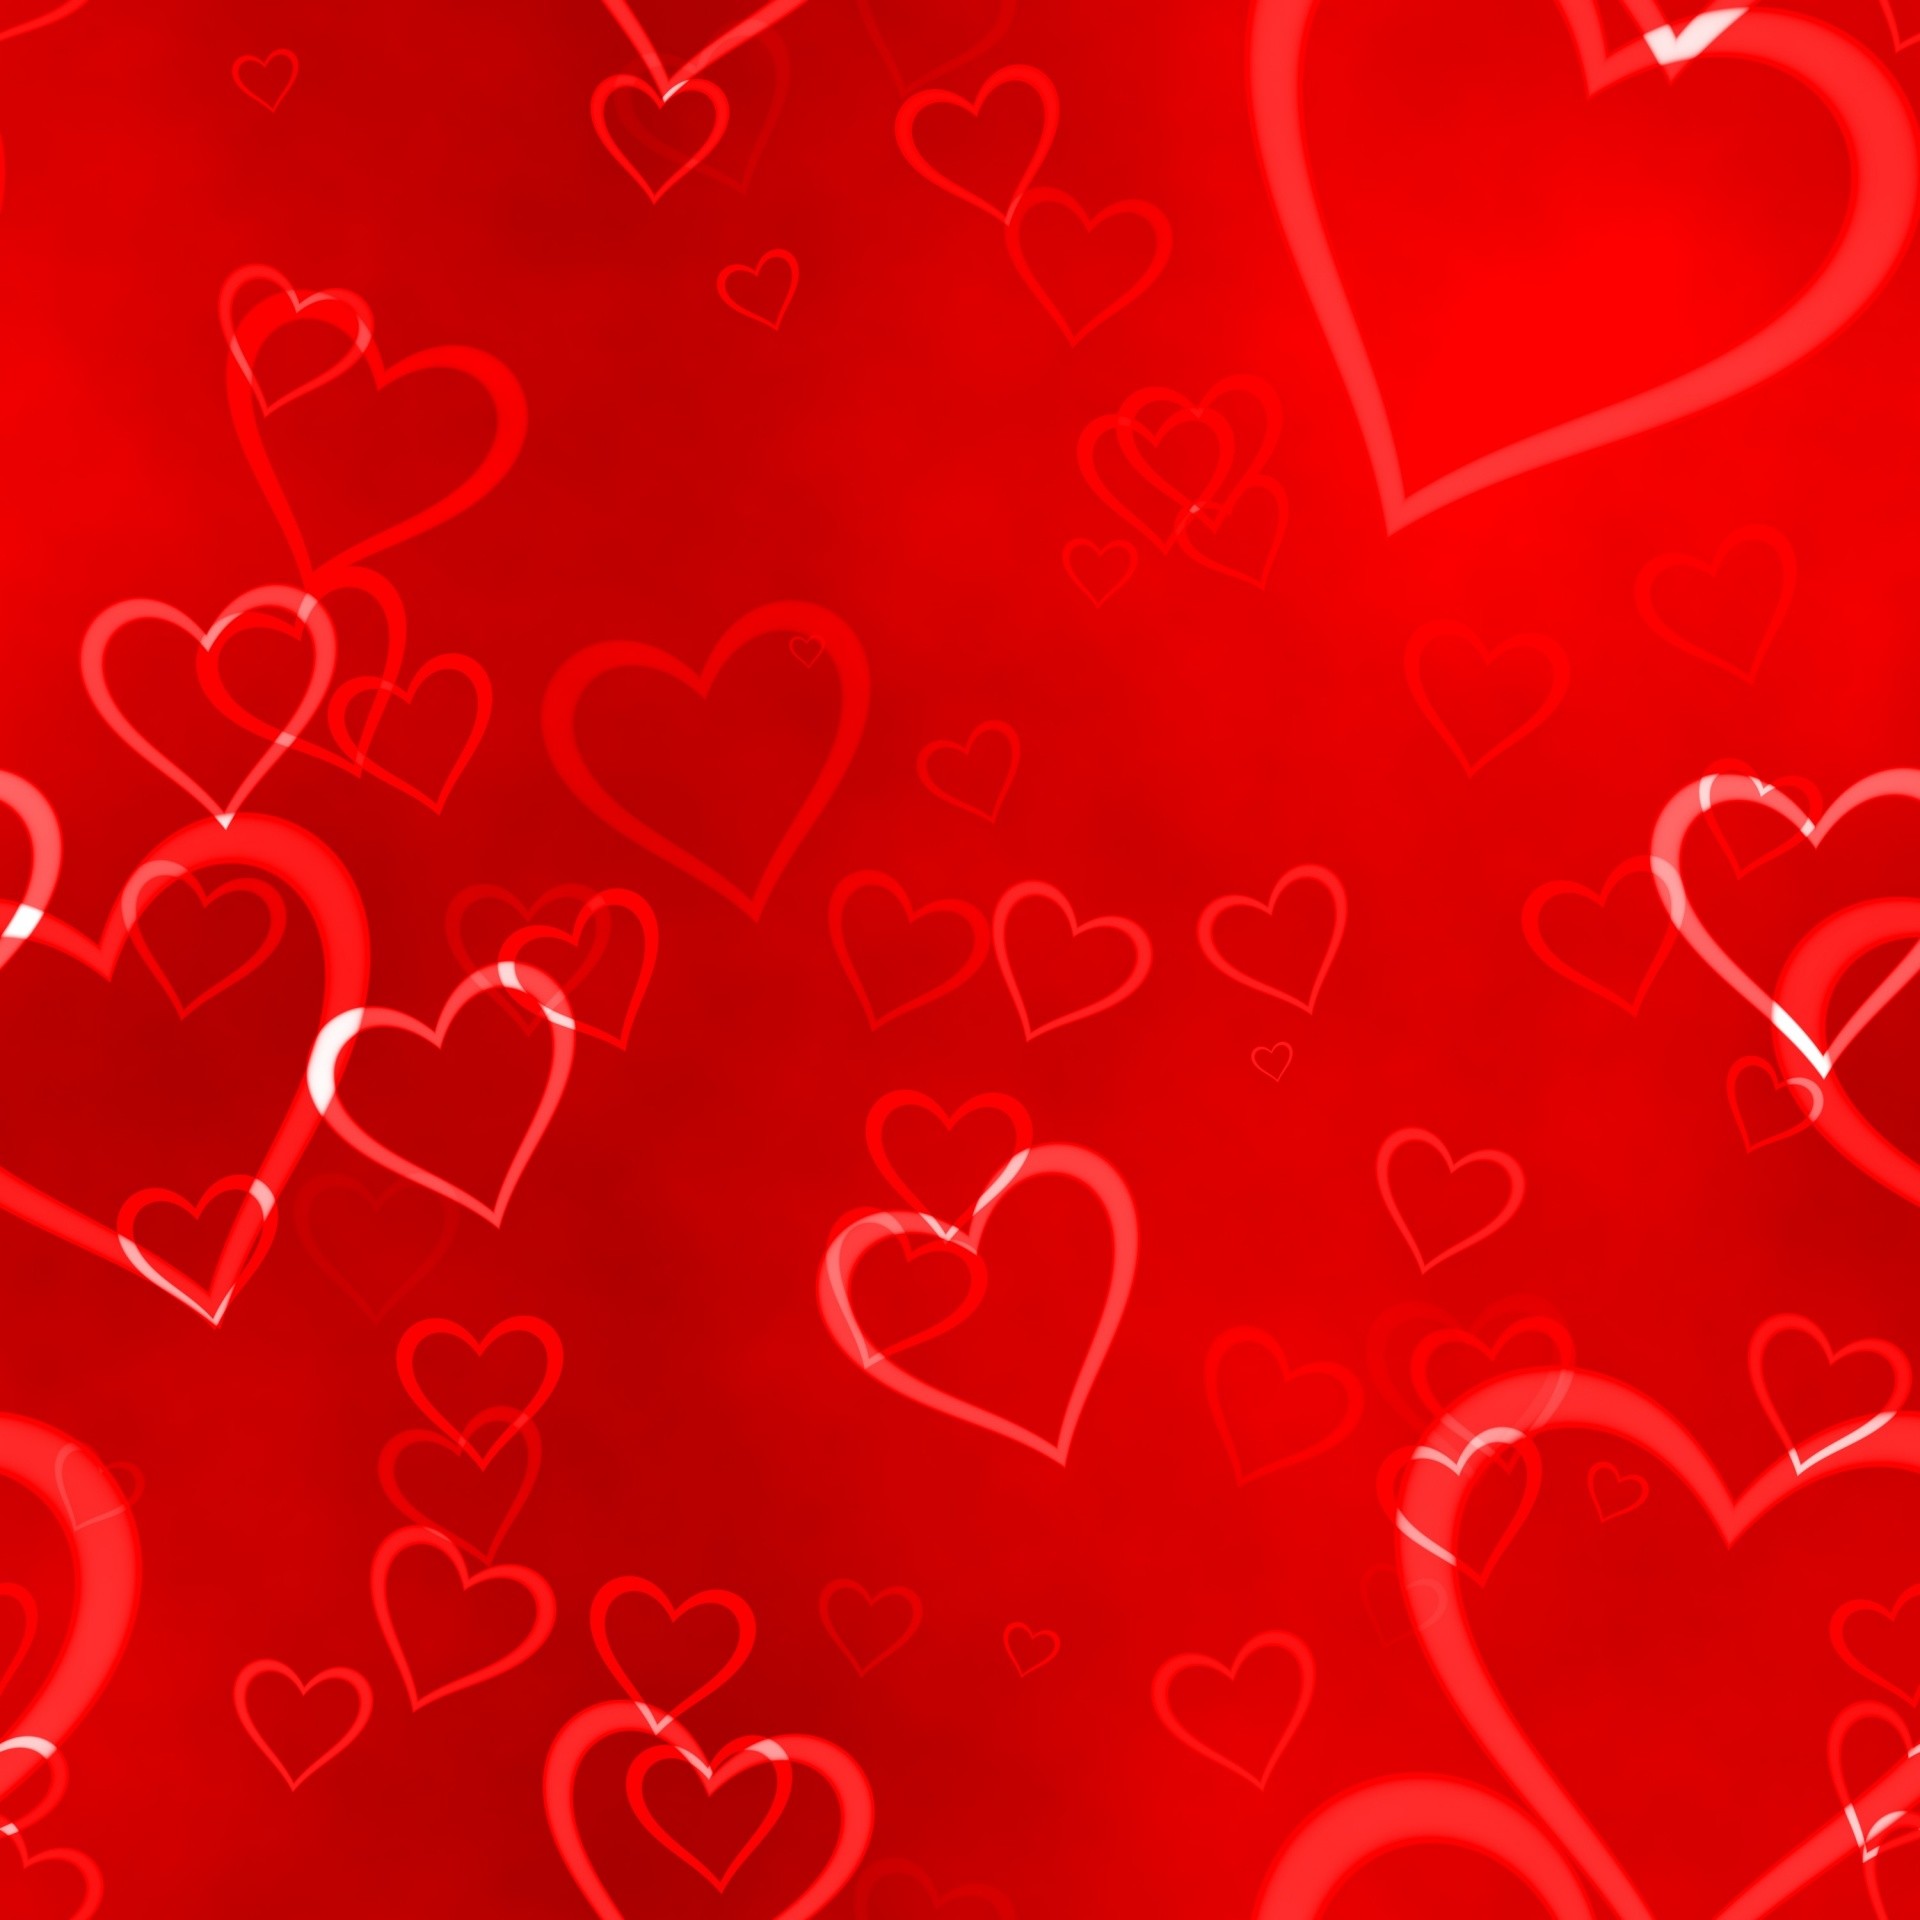 1920x1920 Background Red Hearts